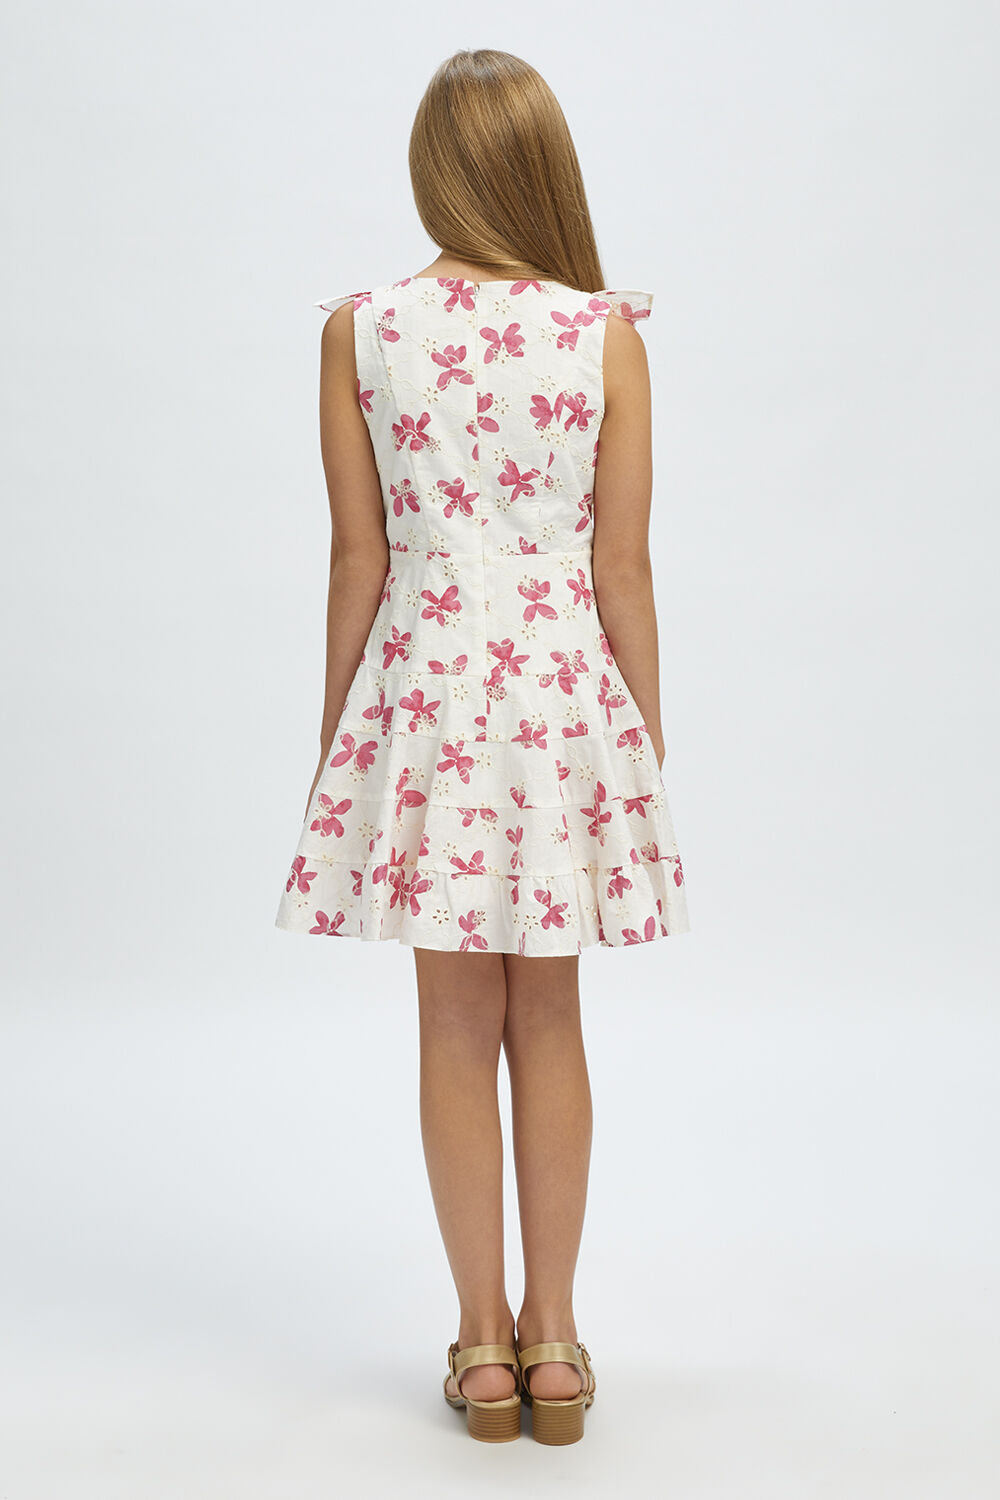 GIRLS SADIE BRODERIE MINI DRESS in colour WILD ORCHID